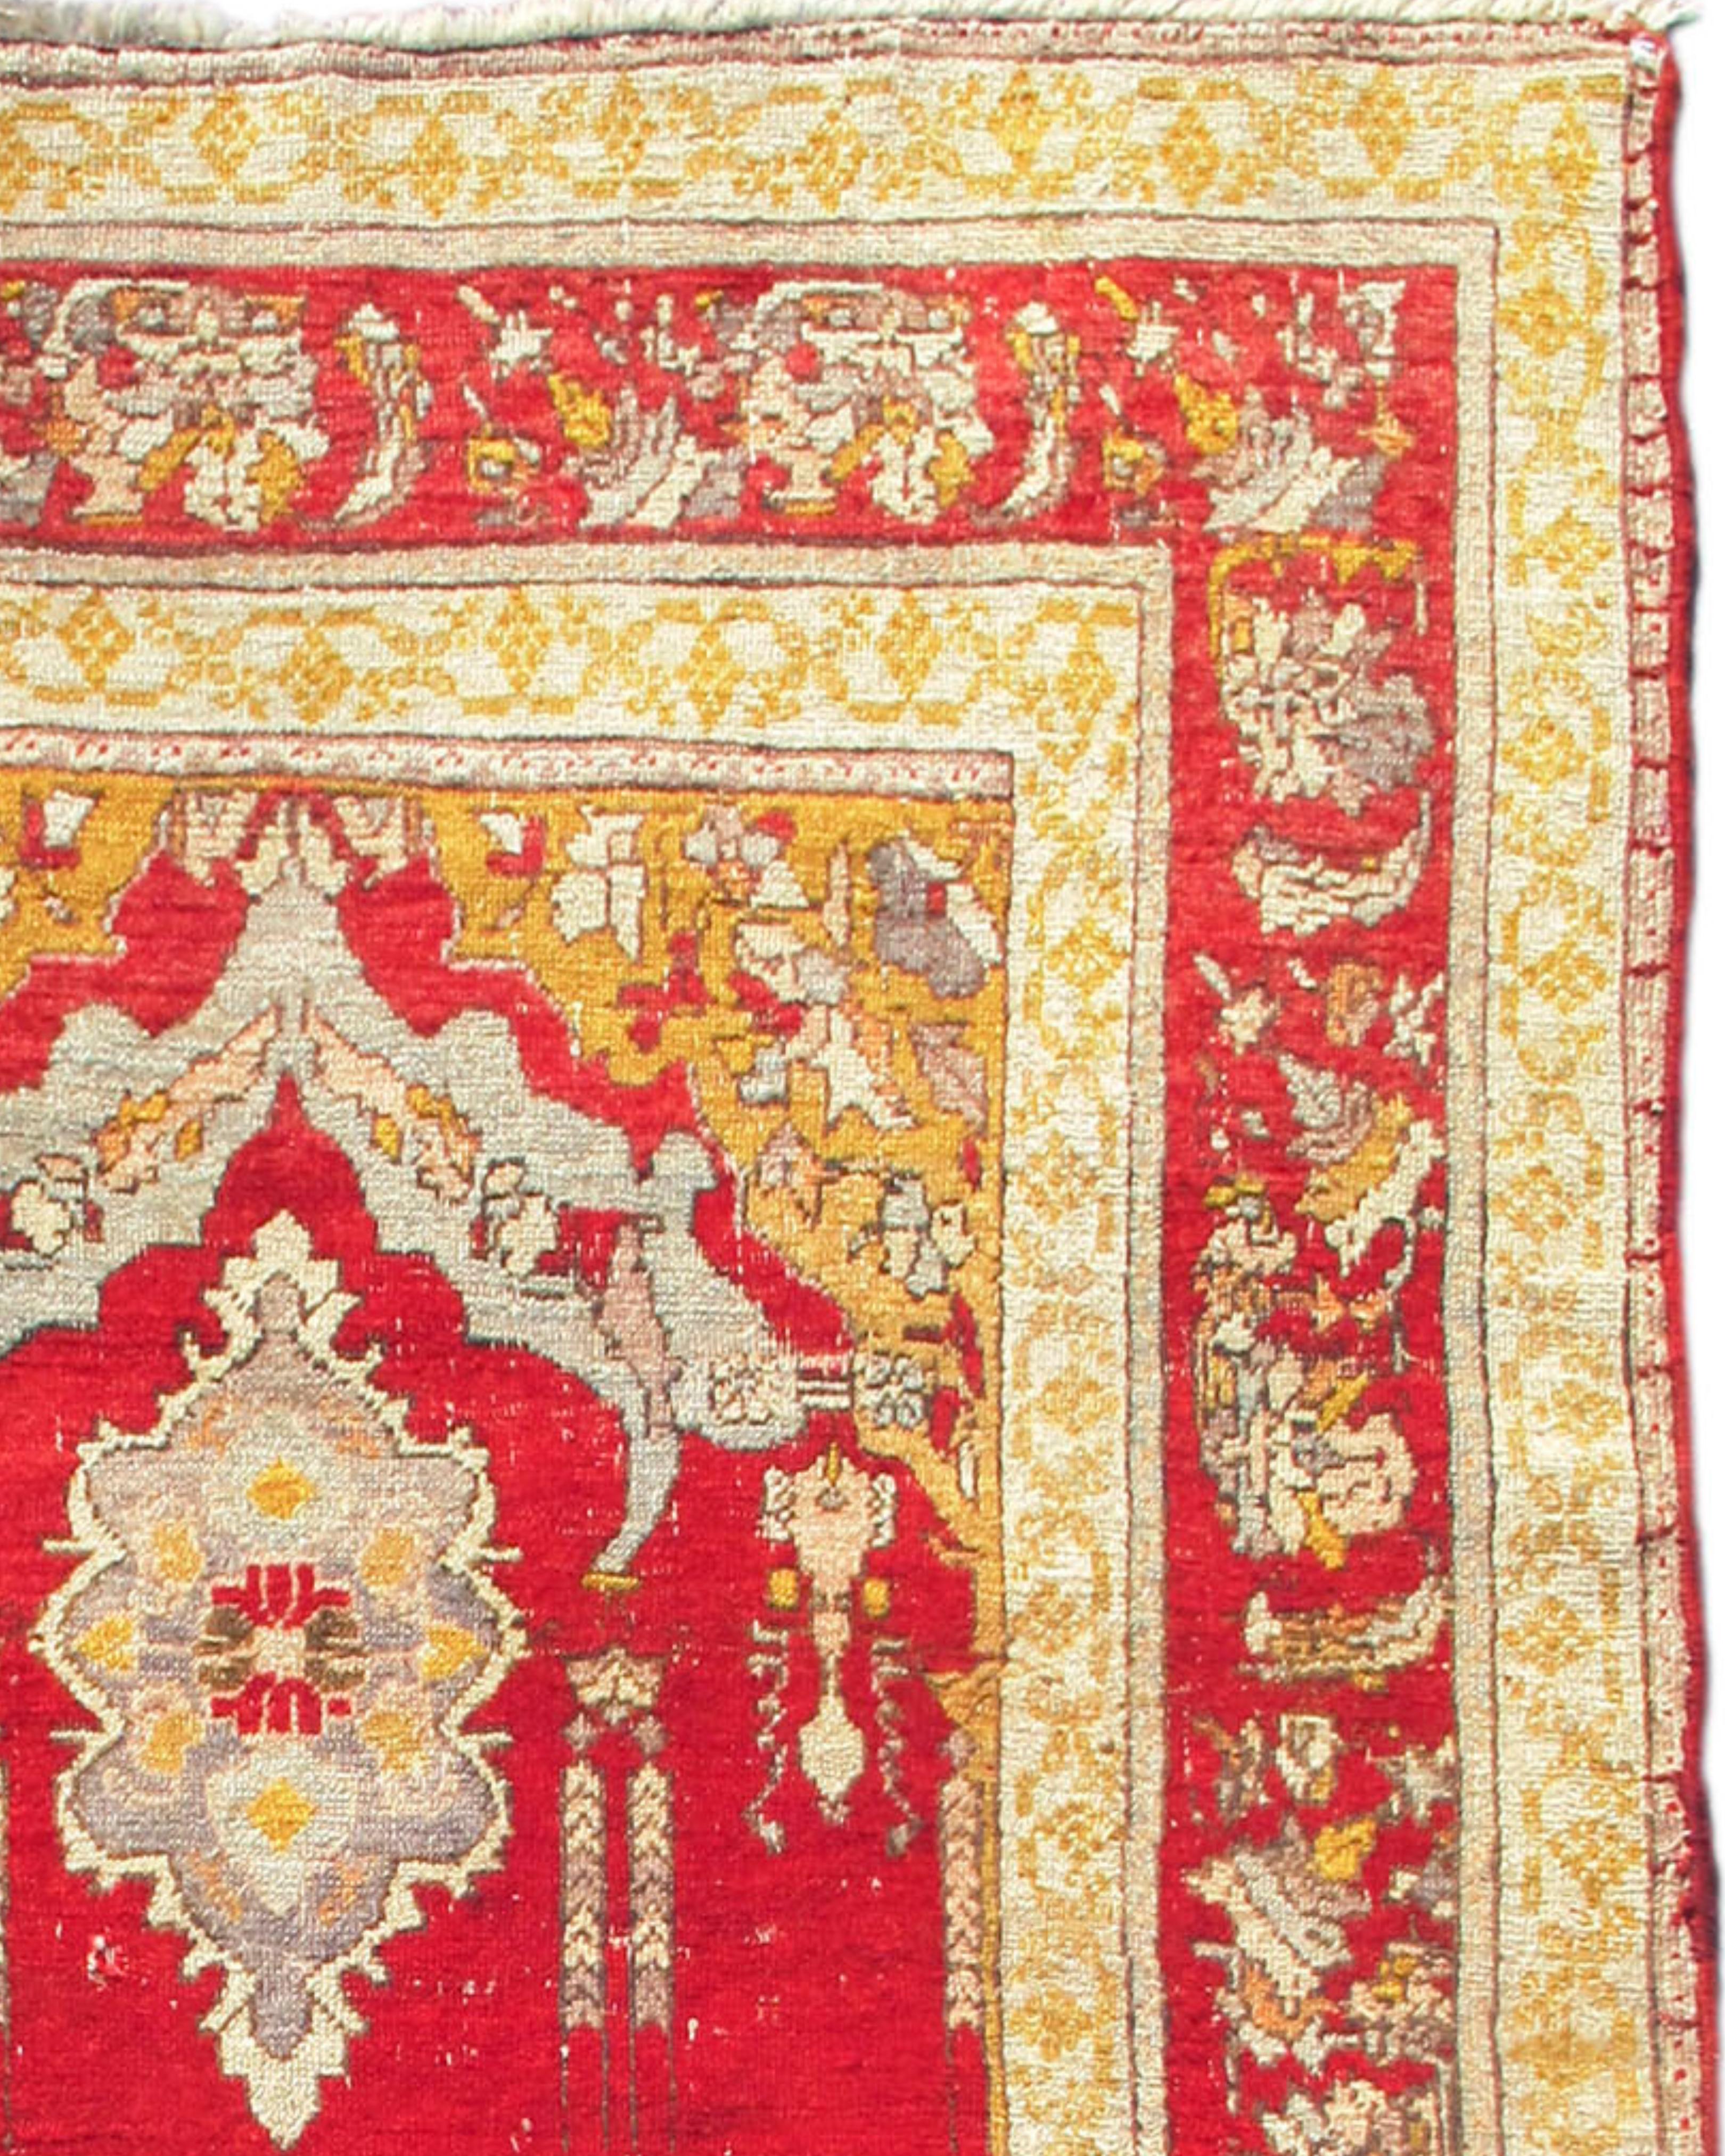 Antique Red and Gold Turkish Oushak Rug, c. 1900

Additional Information:
Dimensions: 6'5